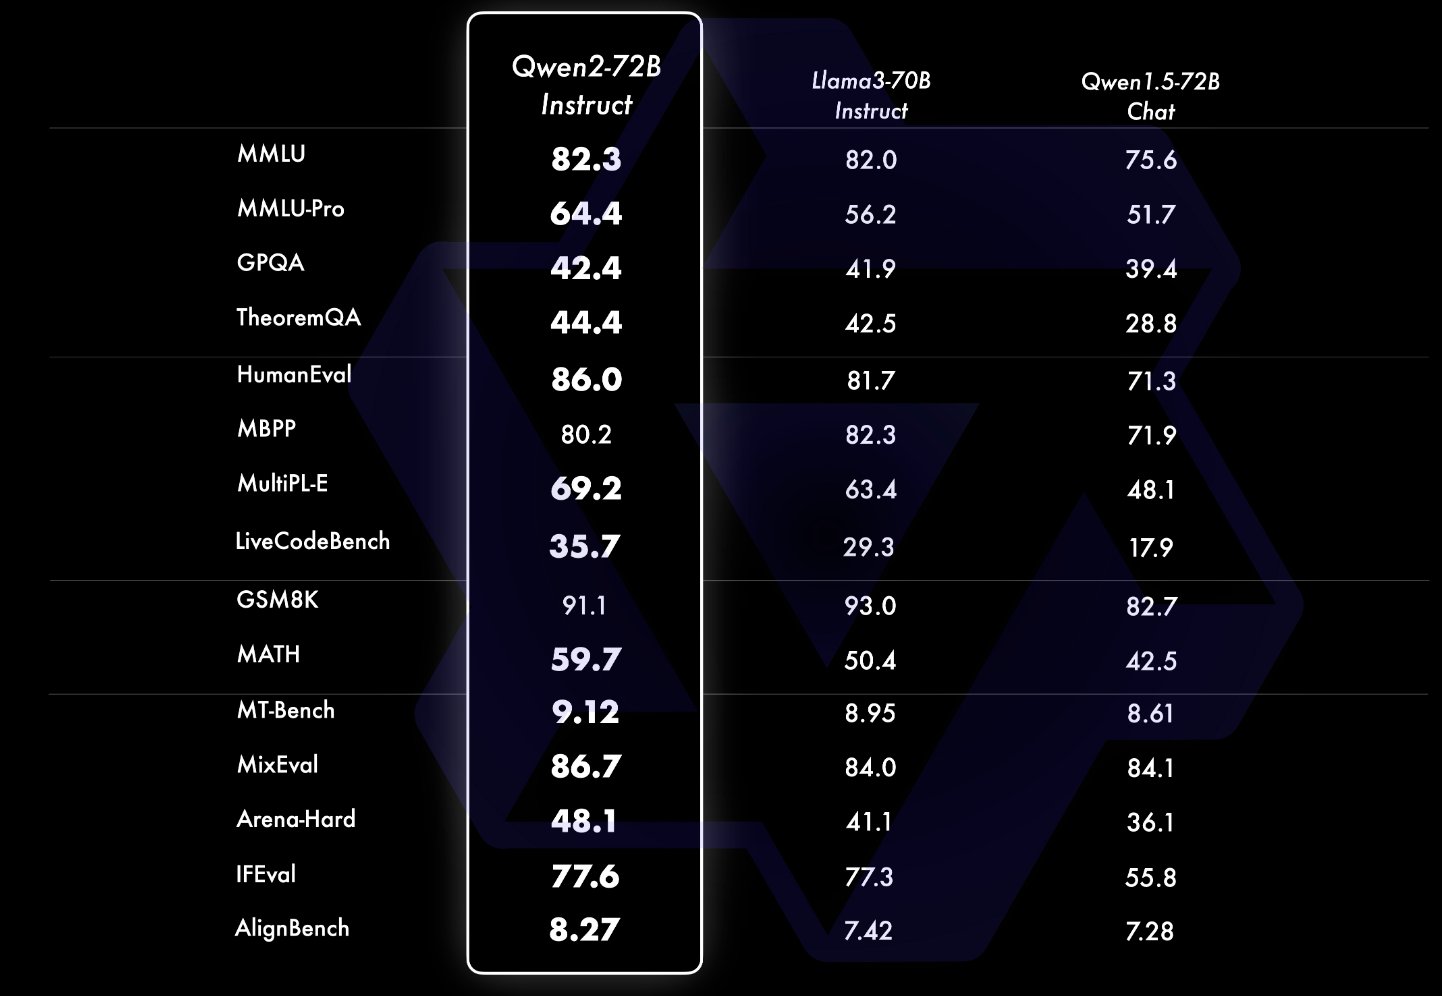  Meet Qwen2-72B: An Advanced AI Model With 72B Parameters, 128K Token Support, Multilingual Mastery, and SOTA Performance